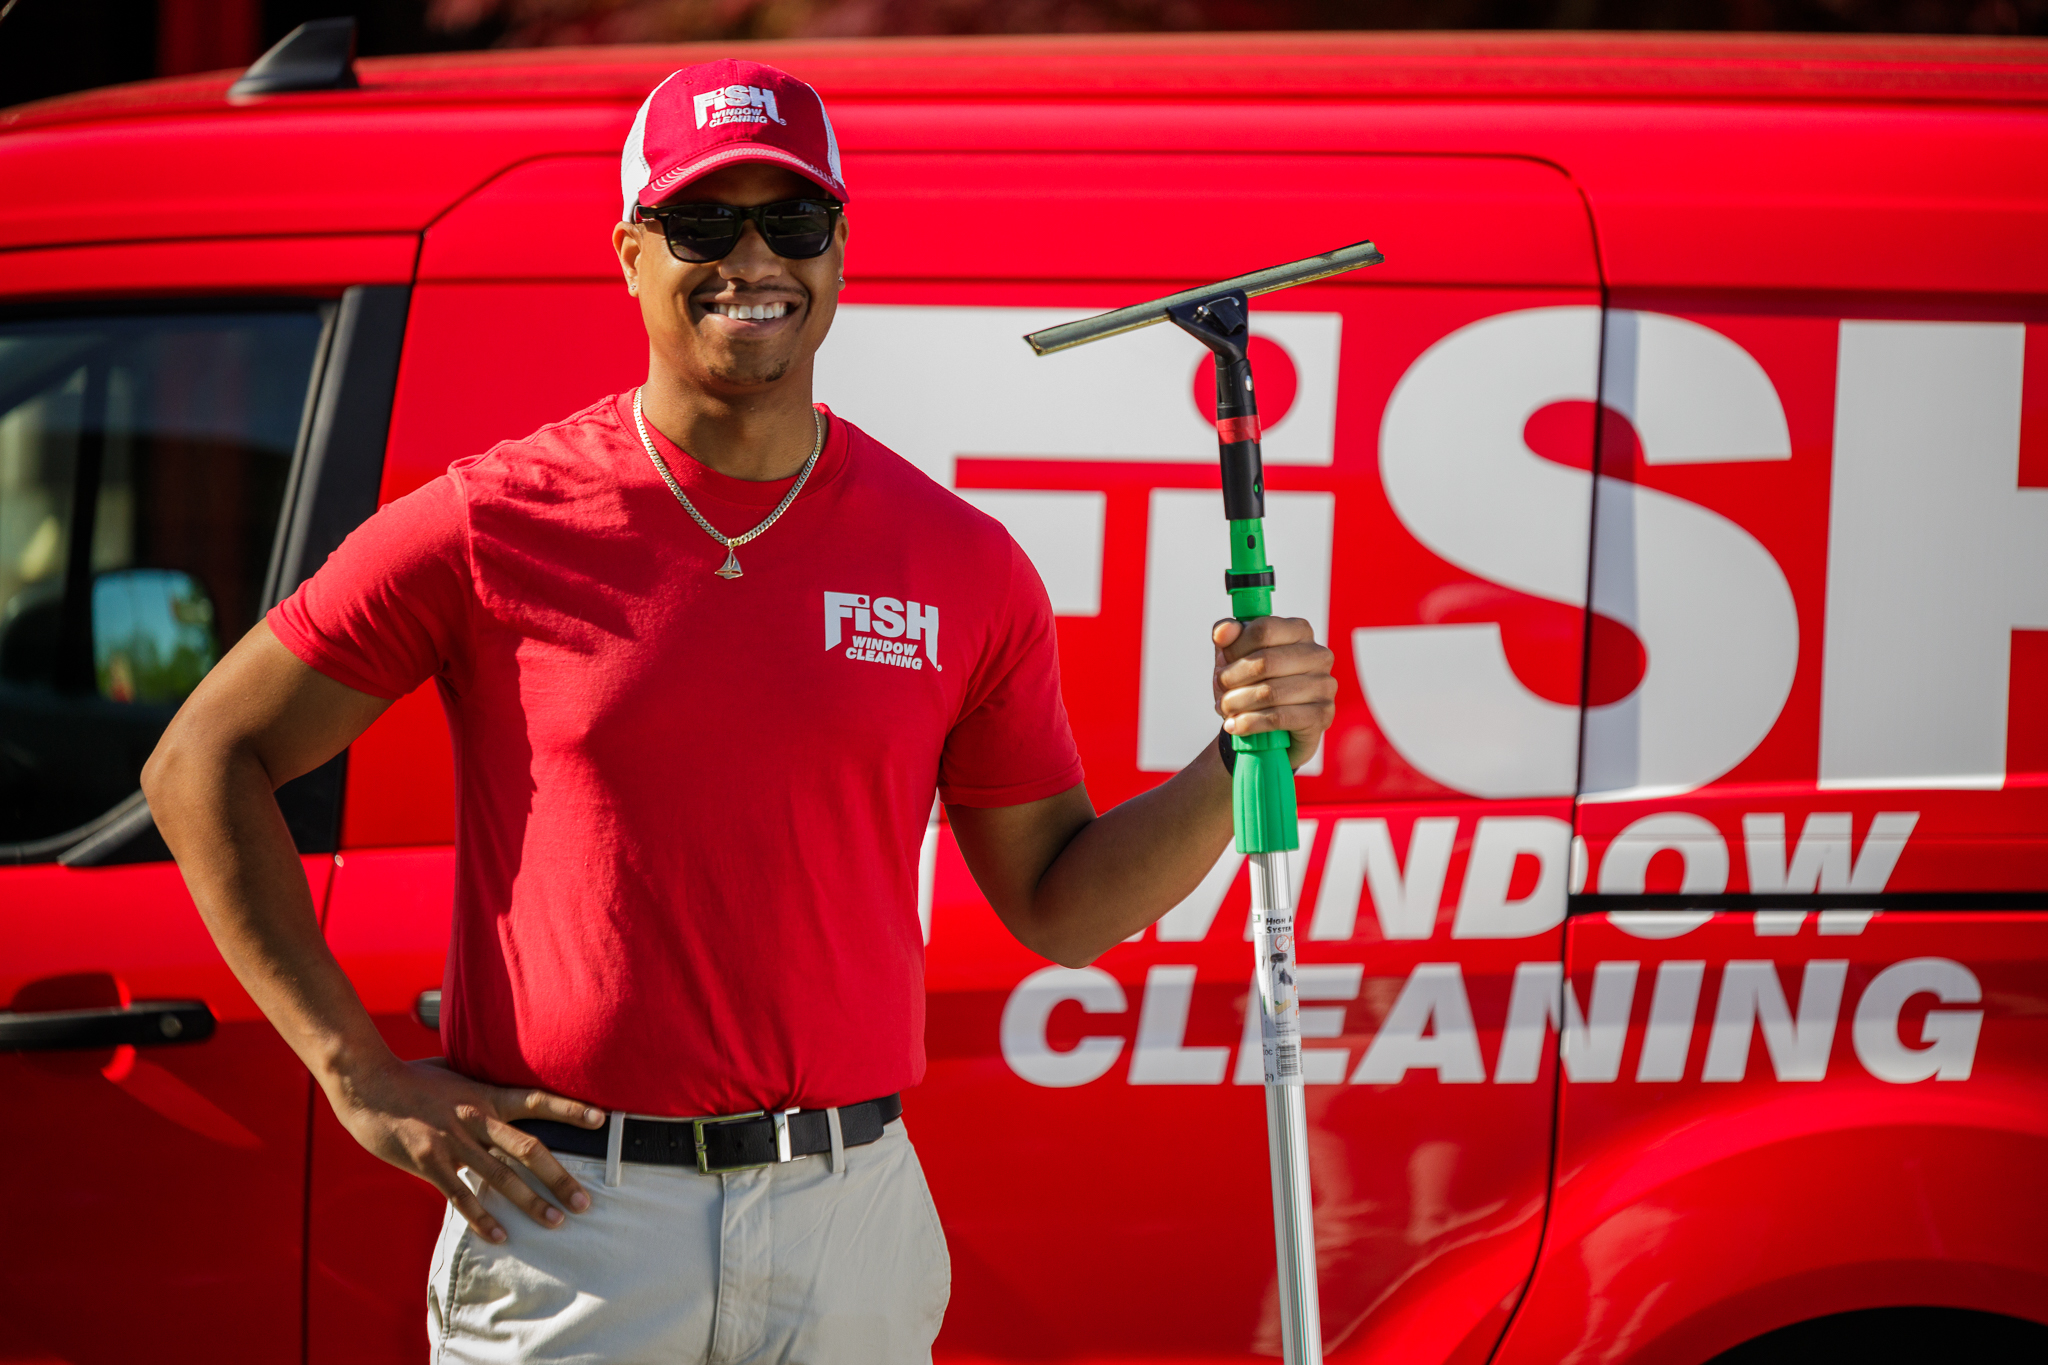 Window Cleaning Services | Fish Window Cleaning